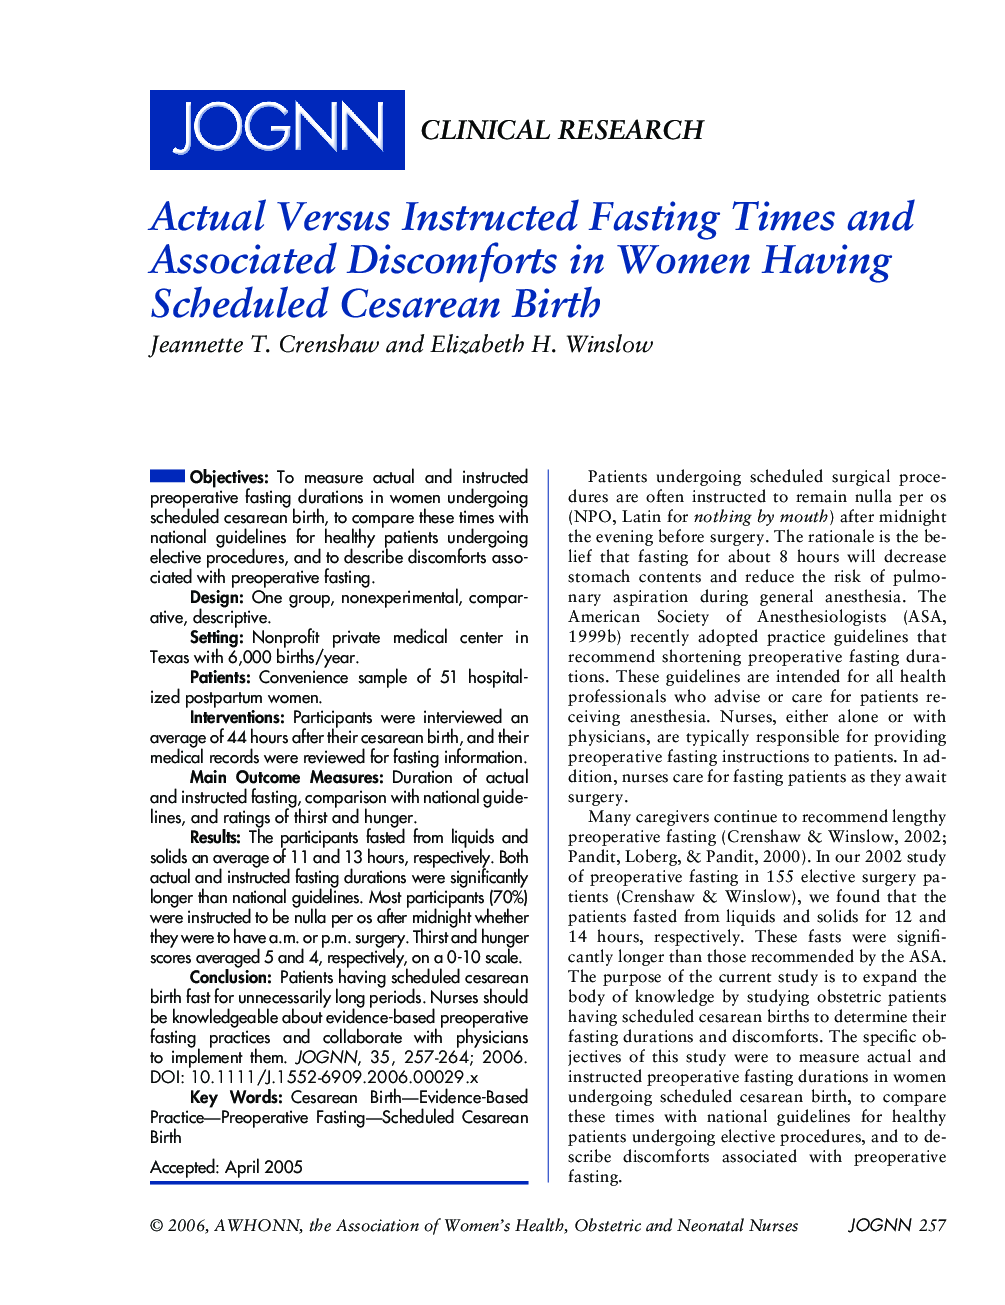 Actual Versus Instructed Fasting Times and Associated Discomforts in Women Having Scheduled Cesarean Birth